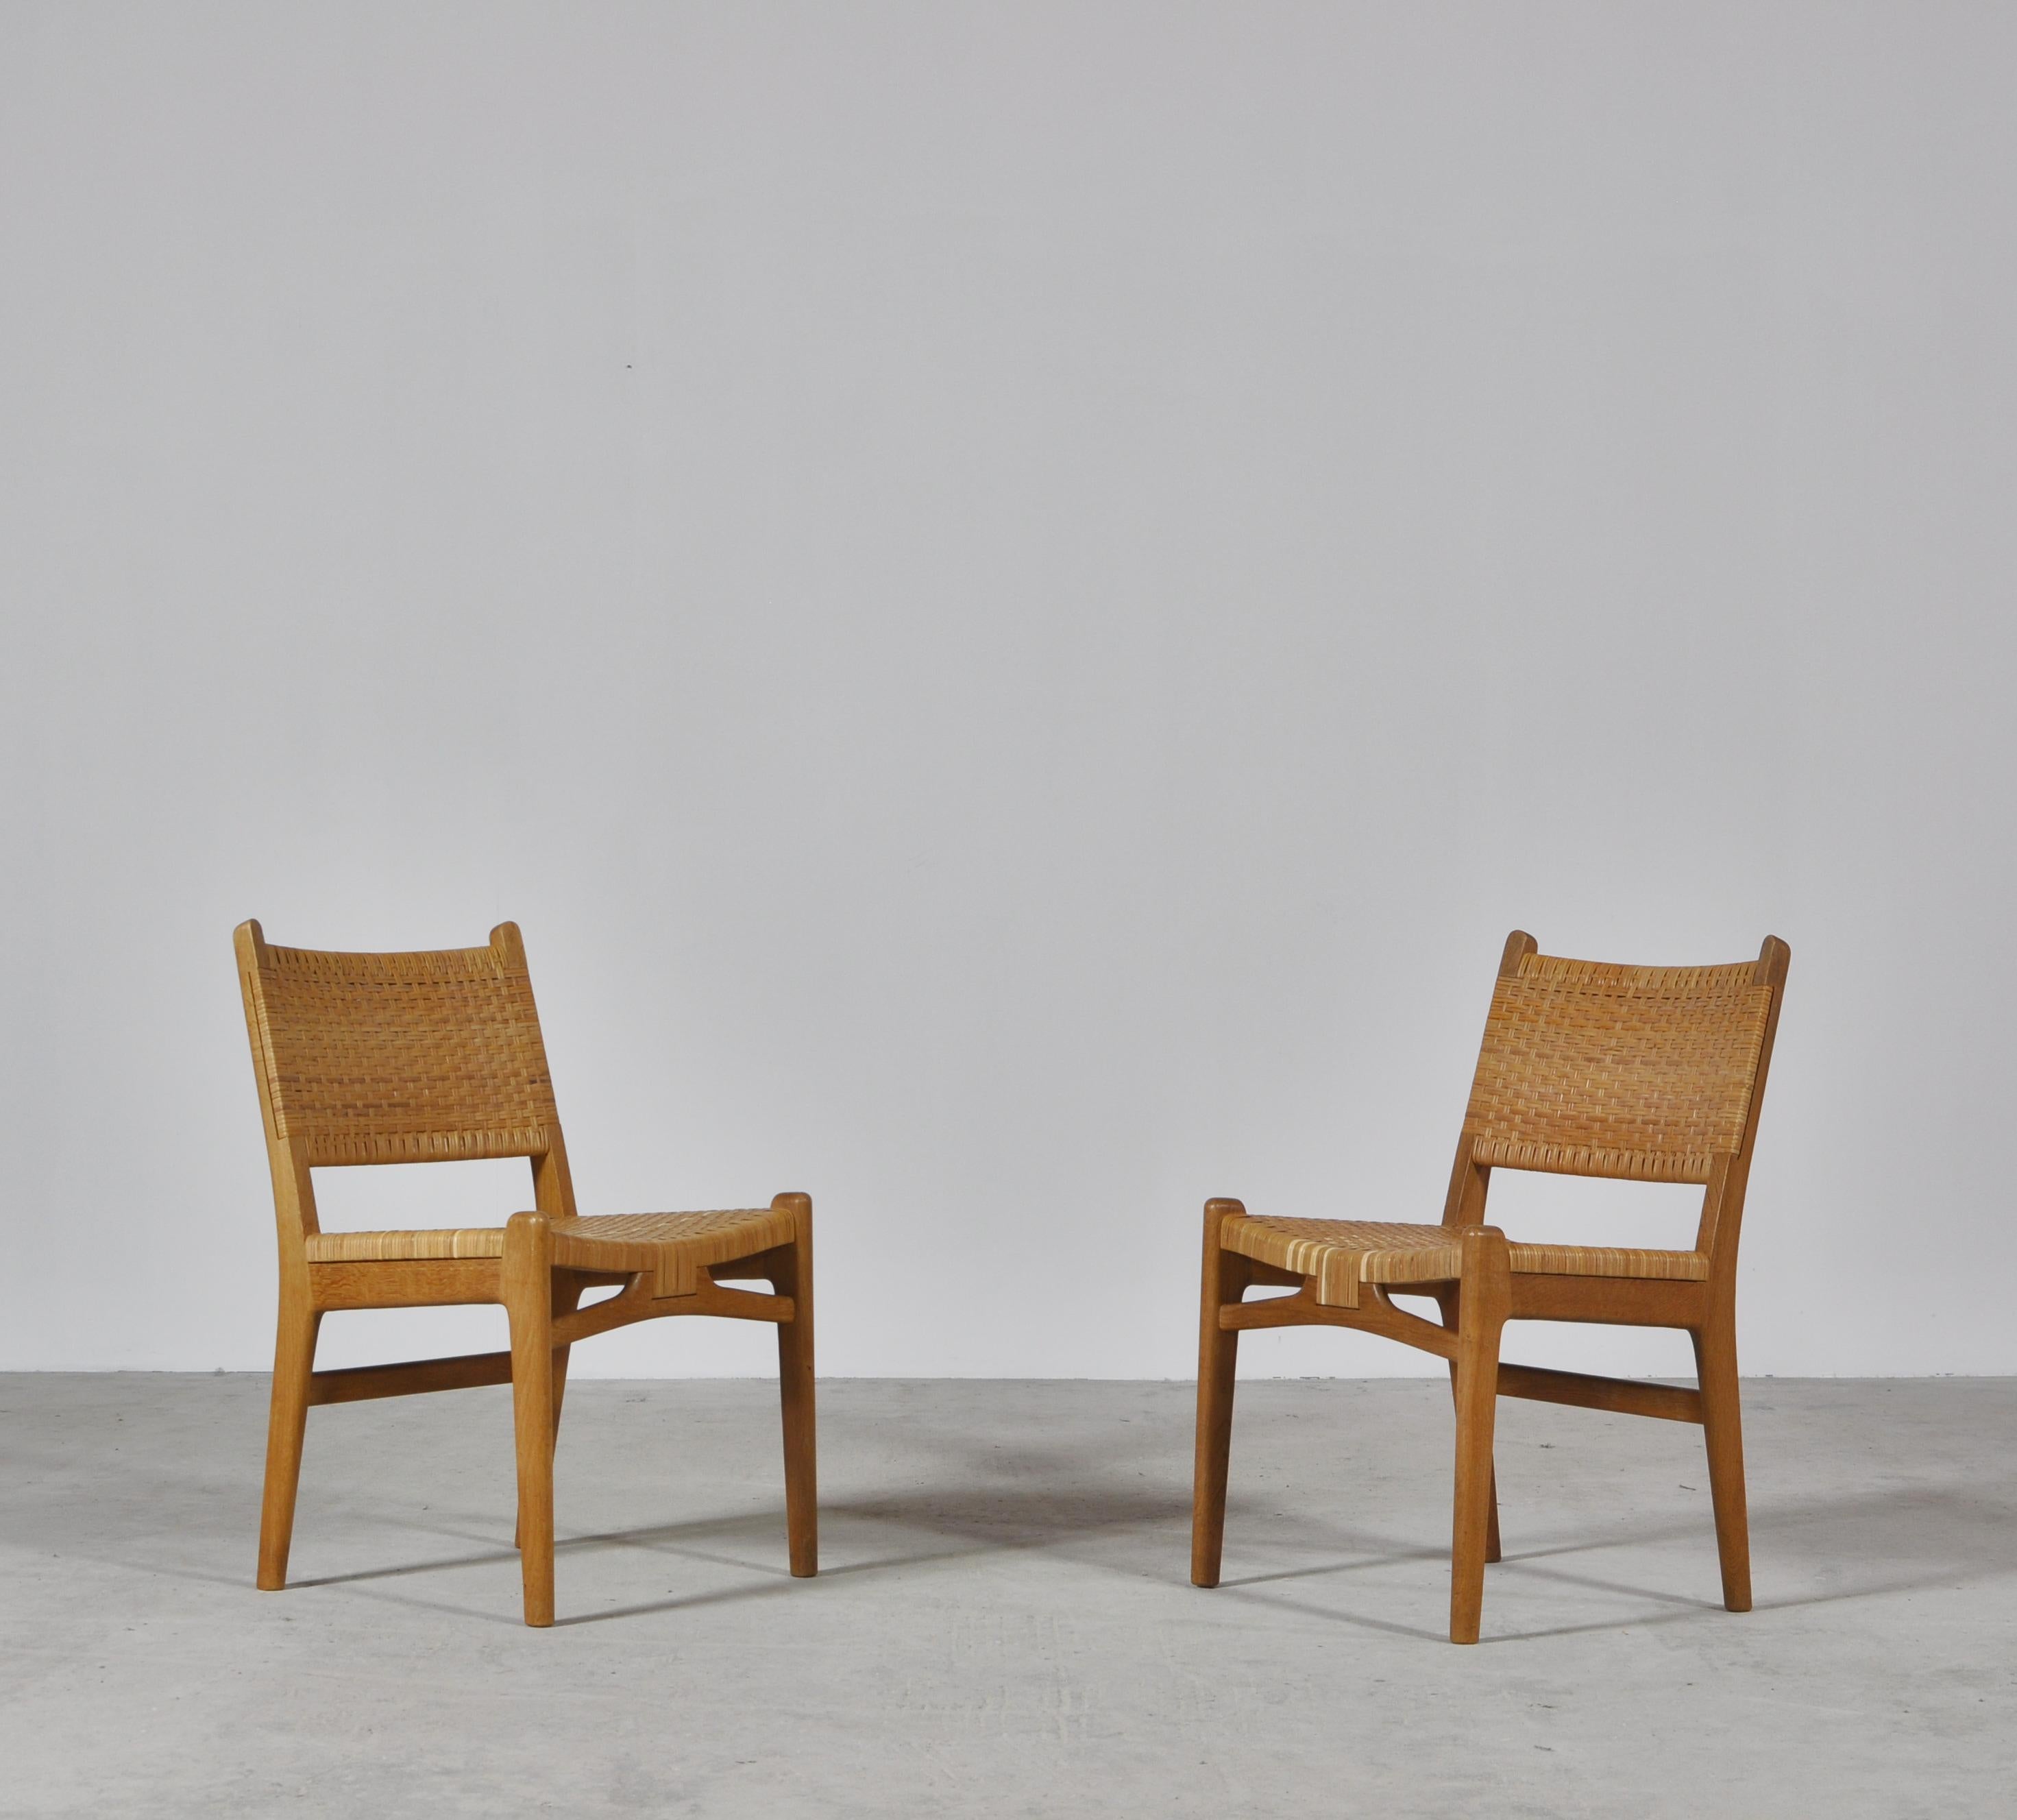 Great pair of side chairs by Hans J. Wegner made for Carl Hansen & Sons in the 1950s. Solid oak with beautiful grain and patina and rattan cane on the seats and back. This model is no longer being produced.